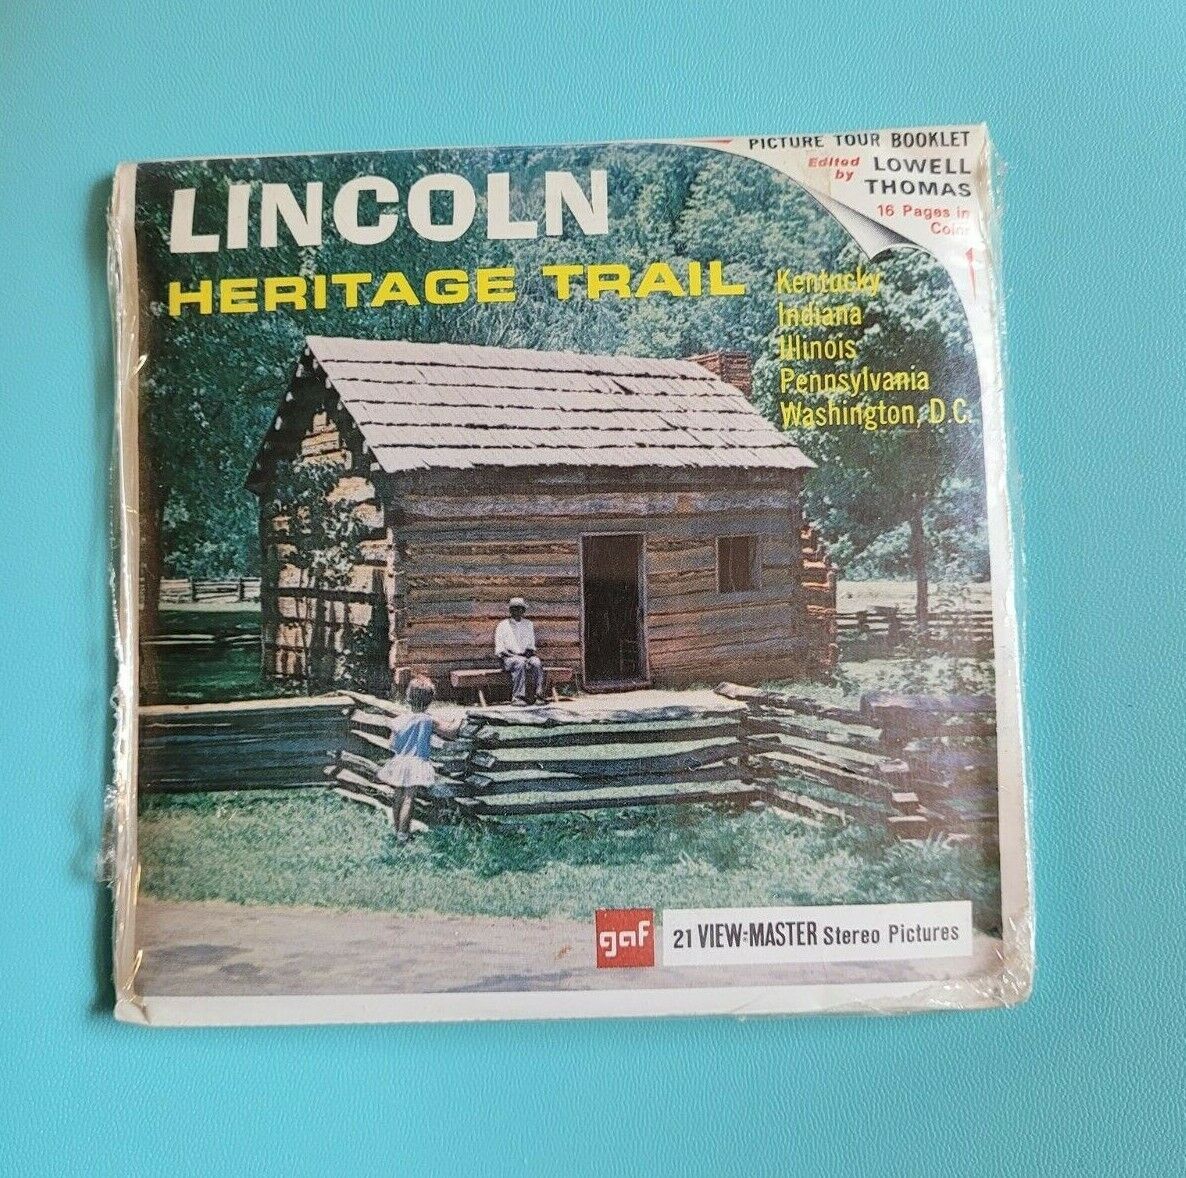 SEALED Gaf A390 Lincoln Heritage Trail KY IL IN PA D.C. view-master Reels Packet